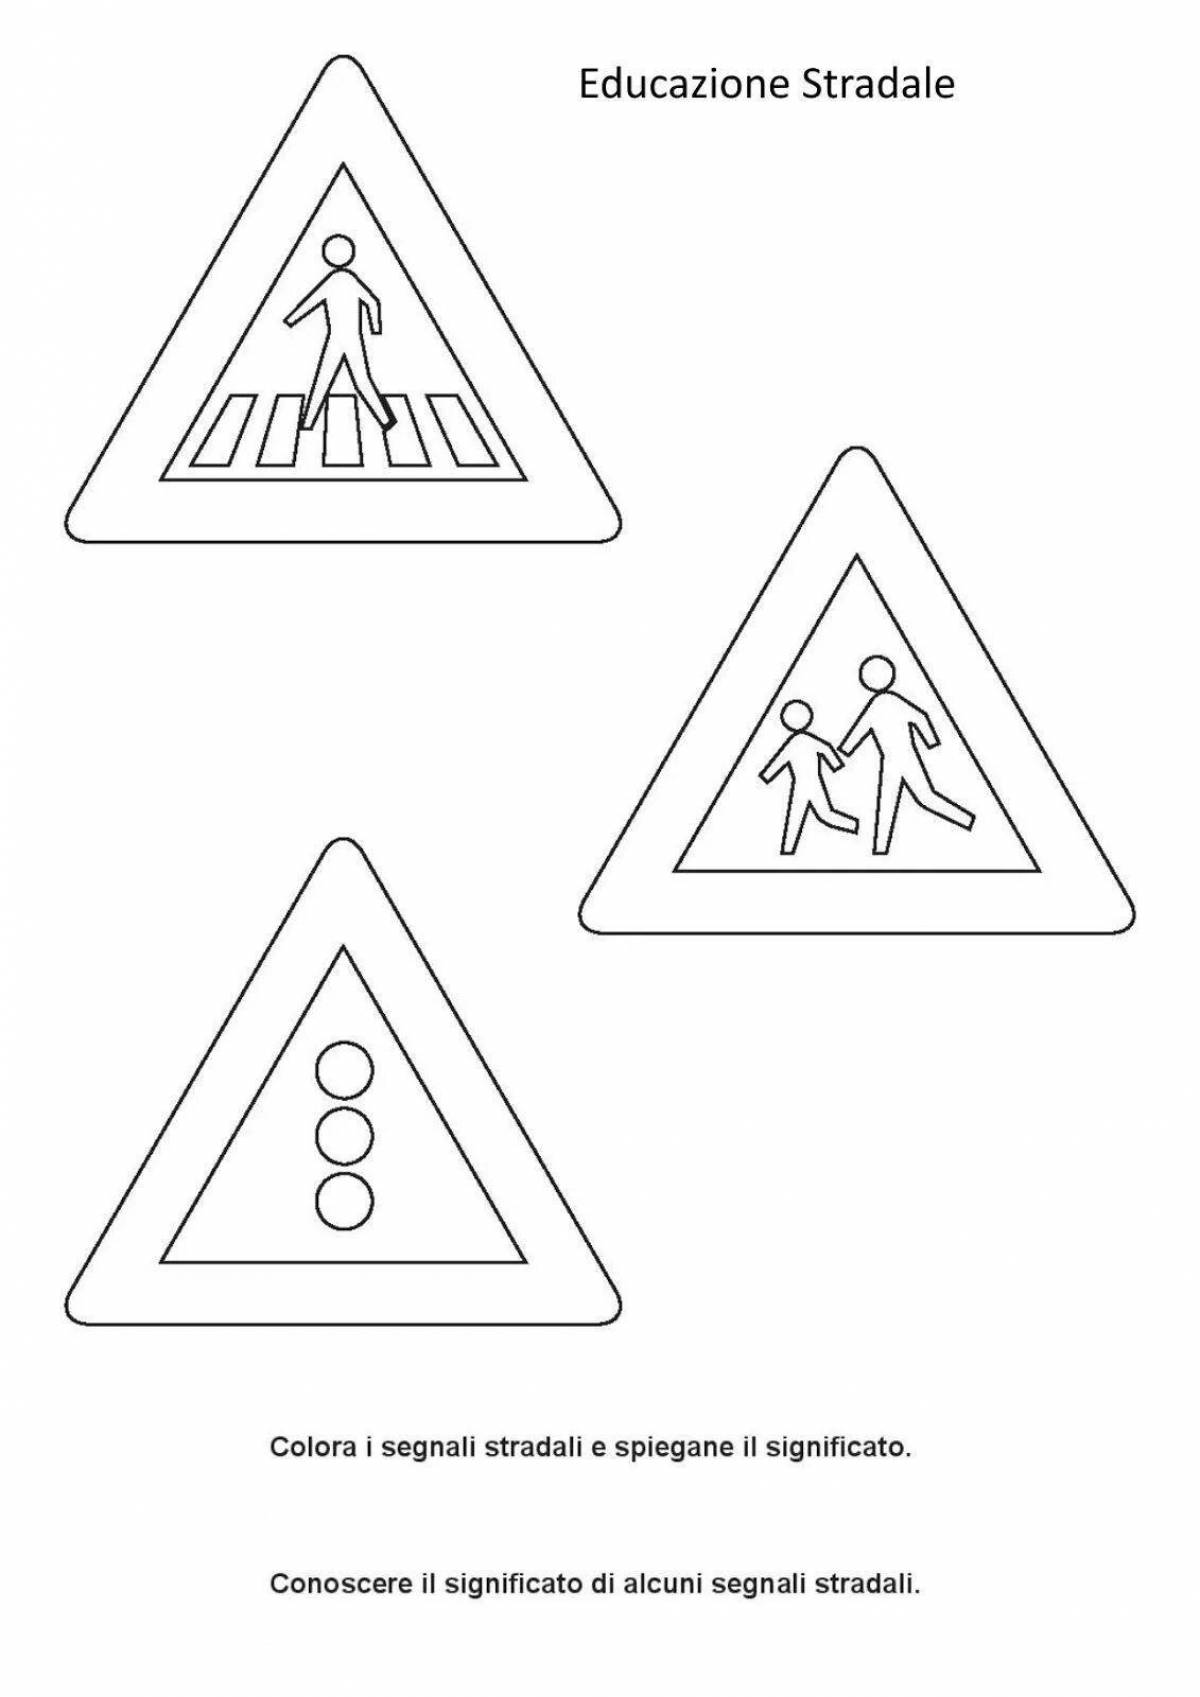 Colorful road signs coloring page for preschoolers